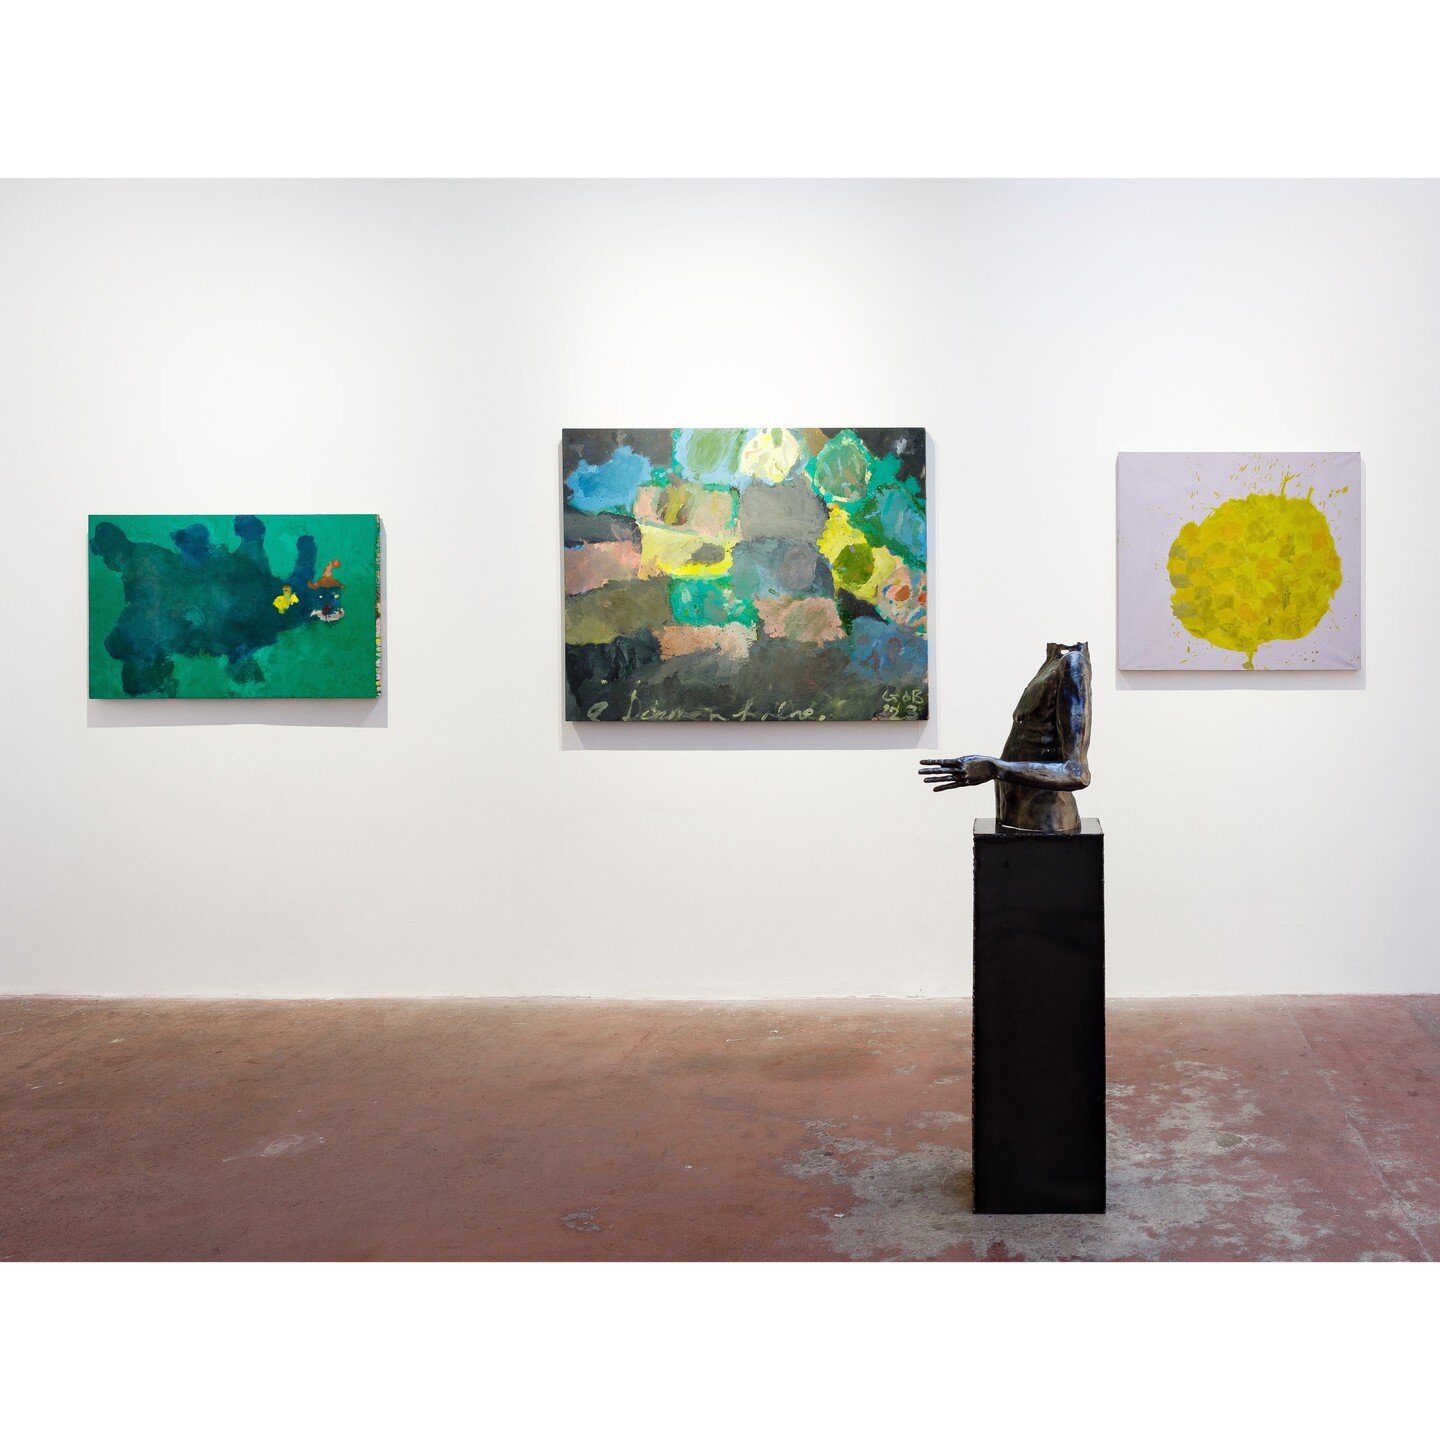 A couple of installation shots from our recent exhibition. 

The first slide features three paintings by Gerry De Banzie and a figurative study in Mild Steel by Barnaby Lewis. This sculptural work is also featured in the second image alongside five w